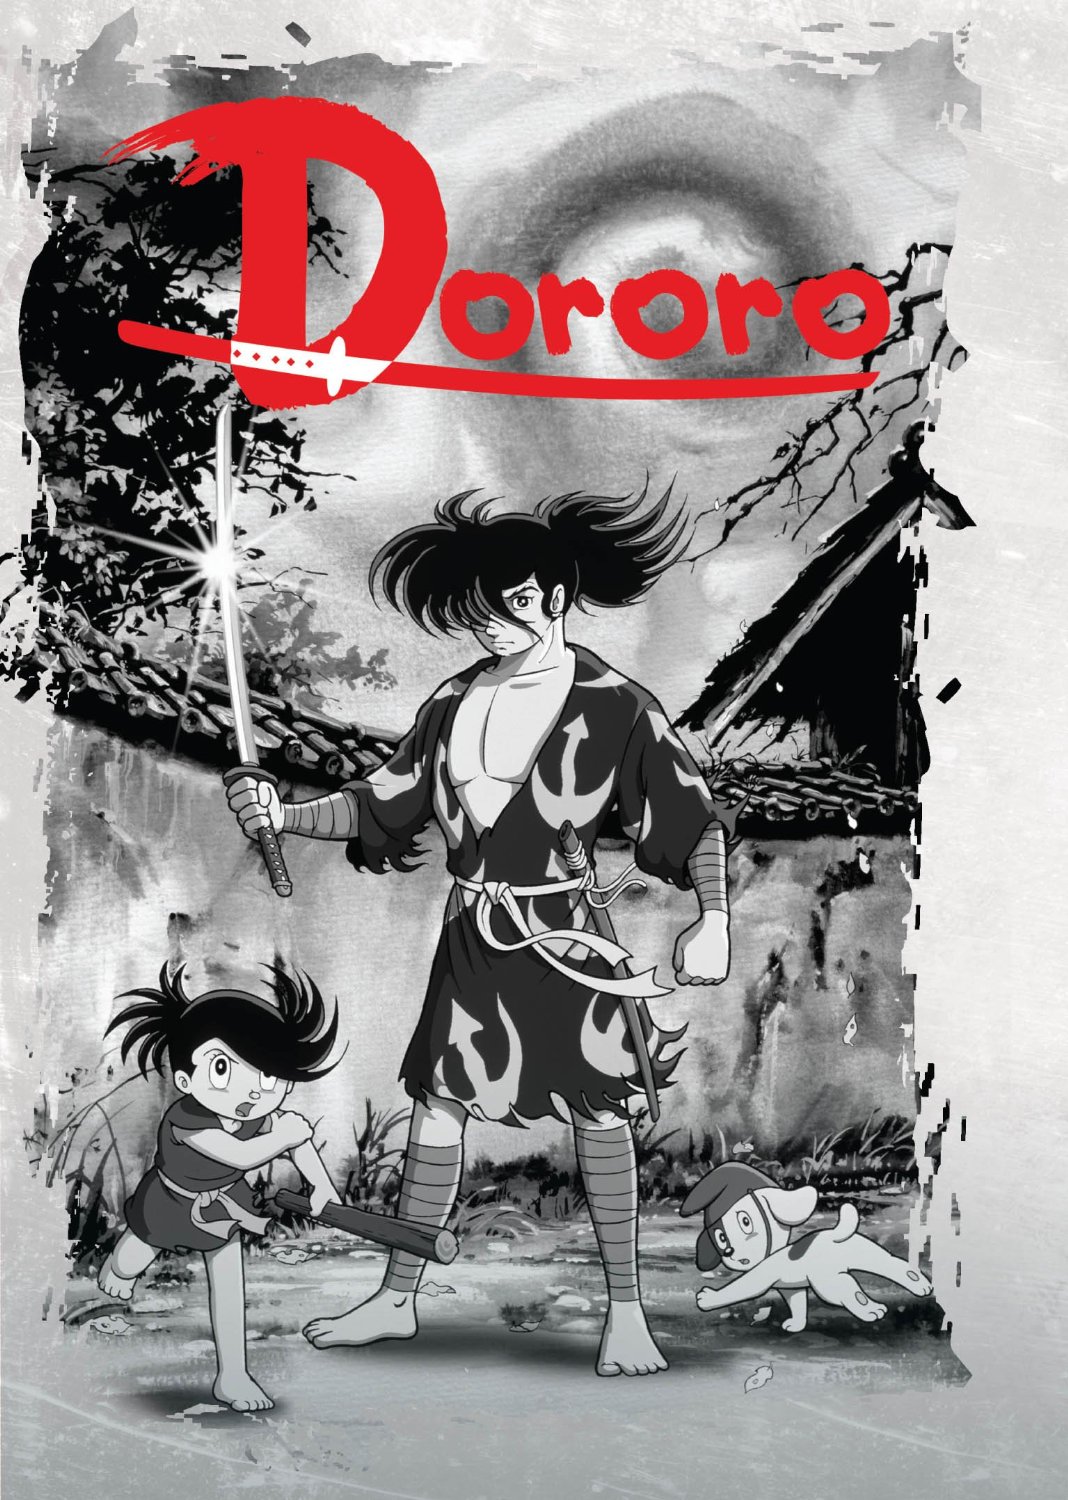 How the Dororo Reboot Successfully Exceeded Fans' Expectations